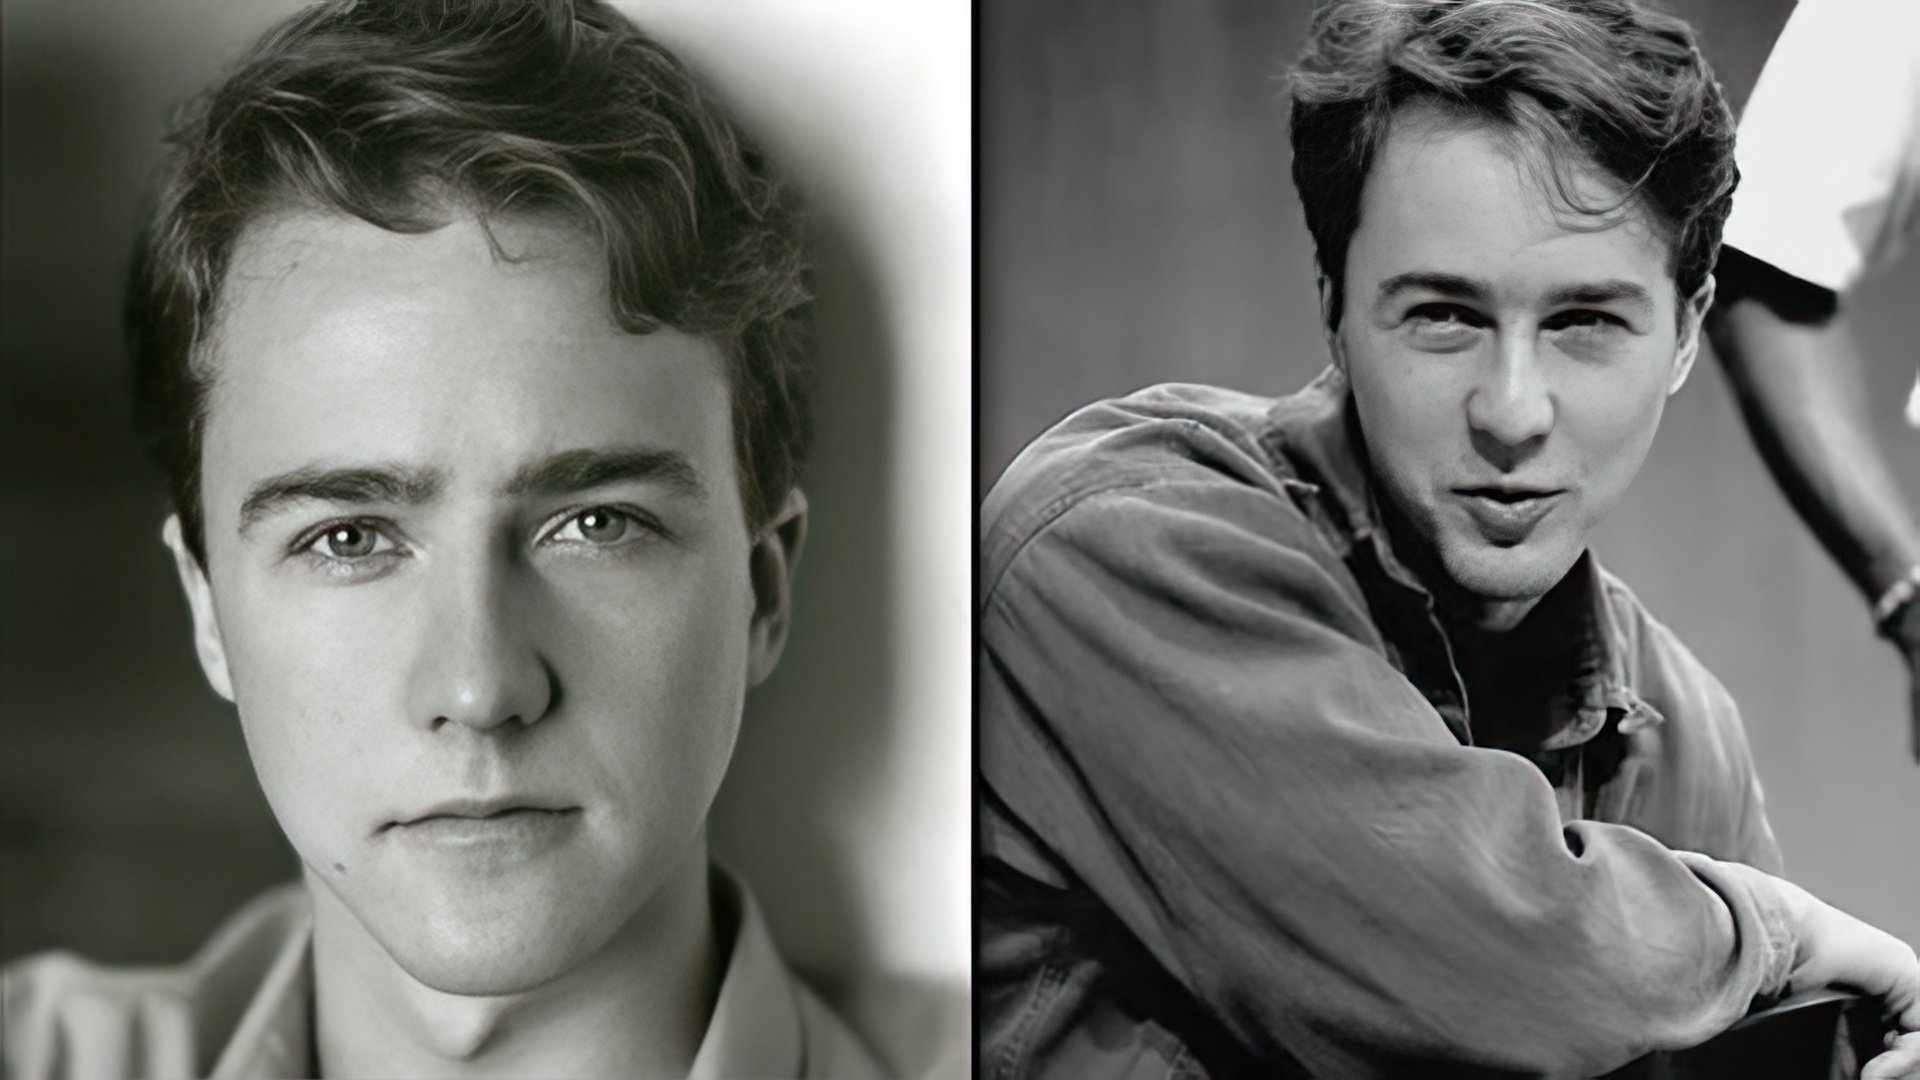 Edward Norton in his youth